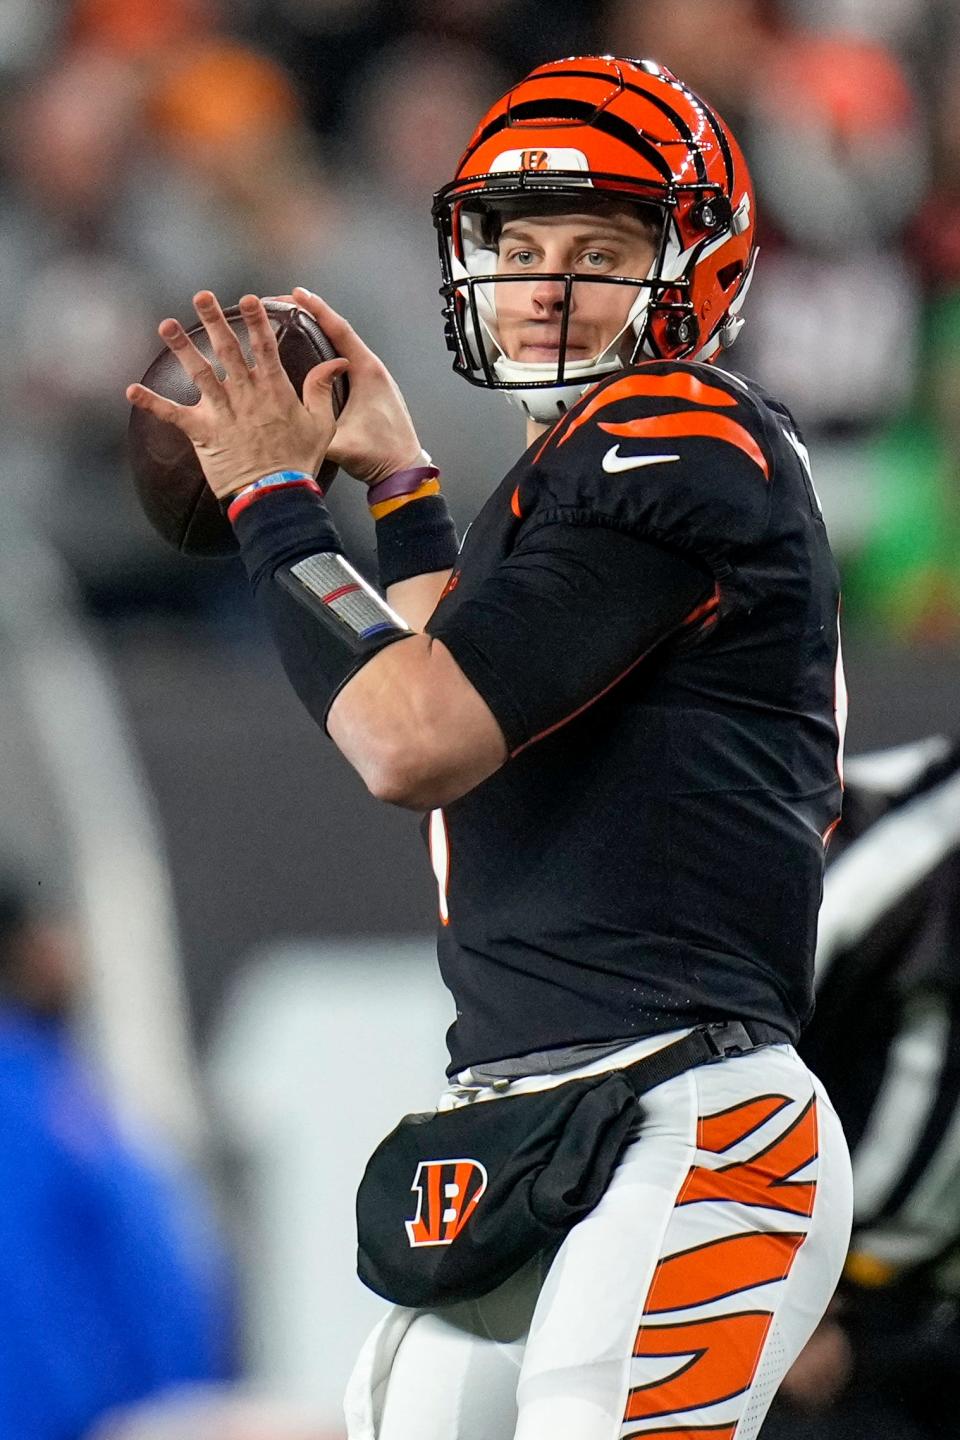 Joe Burrow and the Bengals dispute the perception that they are underdogs in Sunday's playoff game at Buffalo. “I never feel like an underdog,” Burrow says.